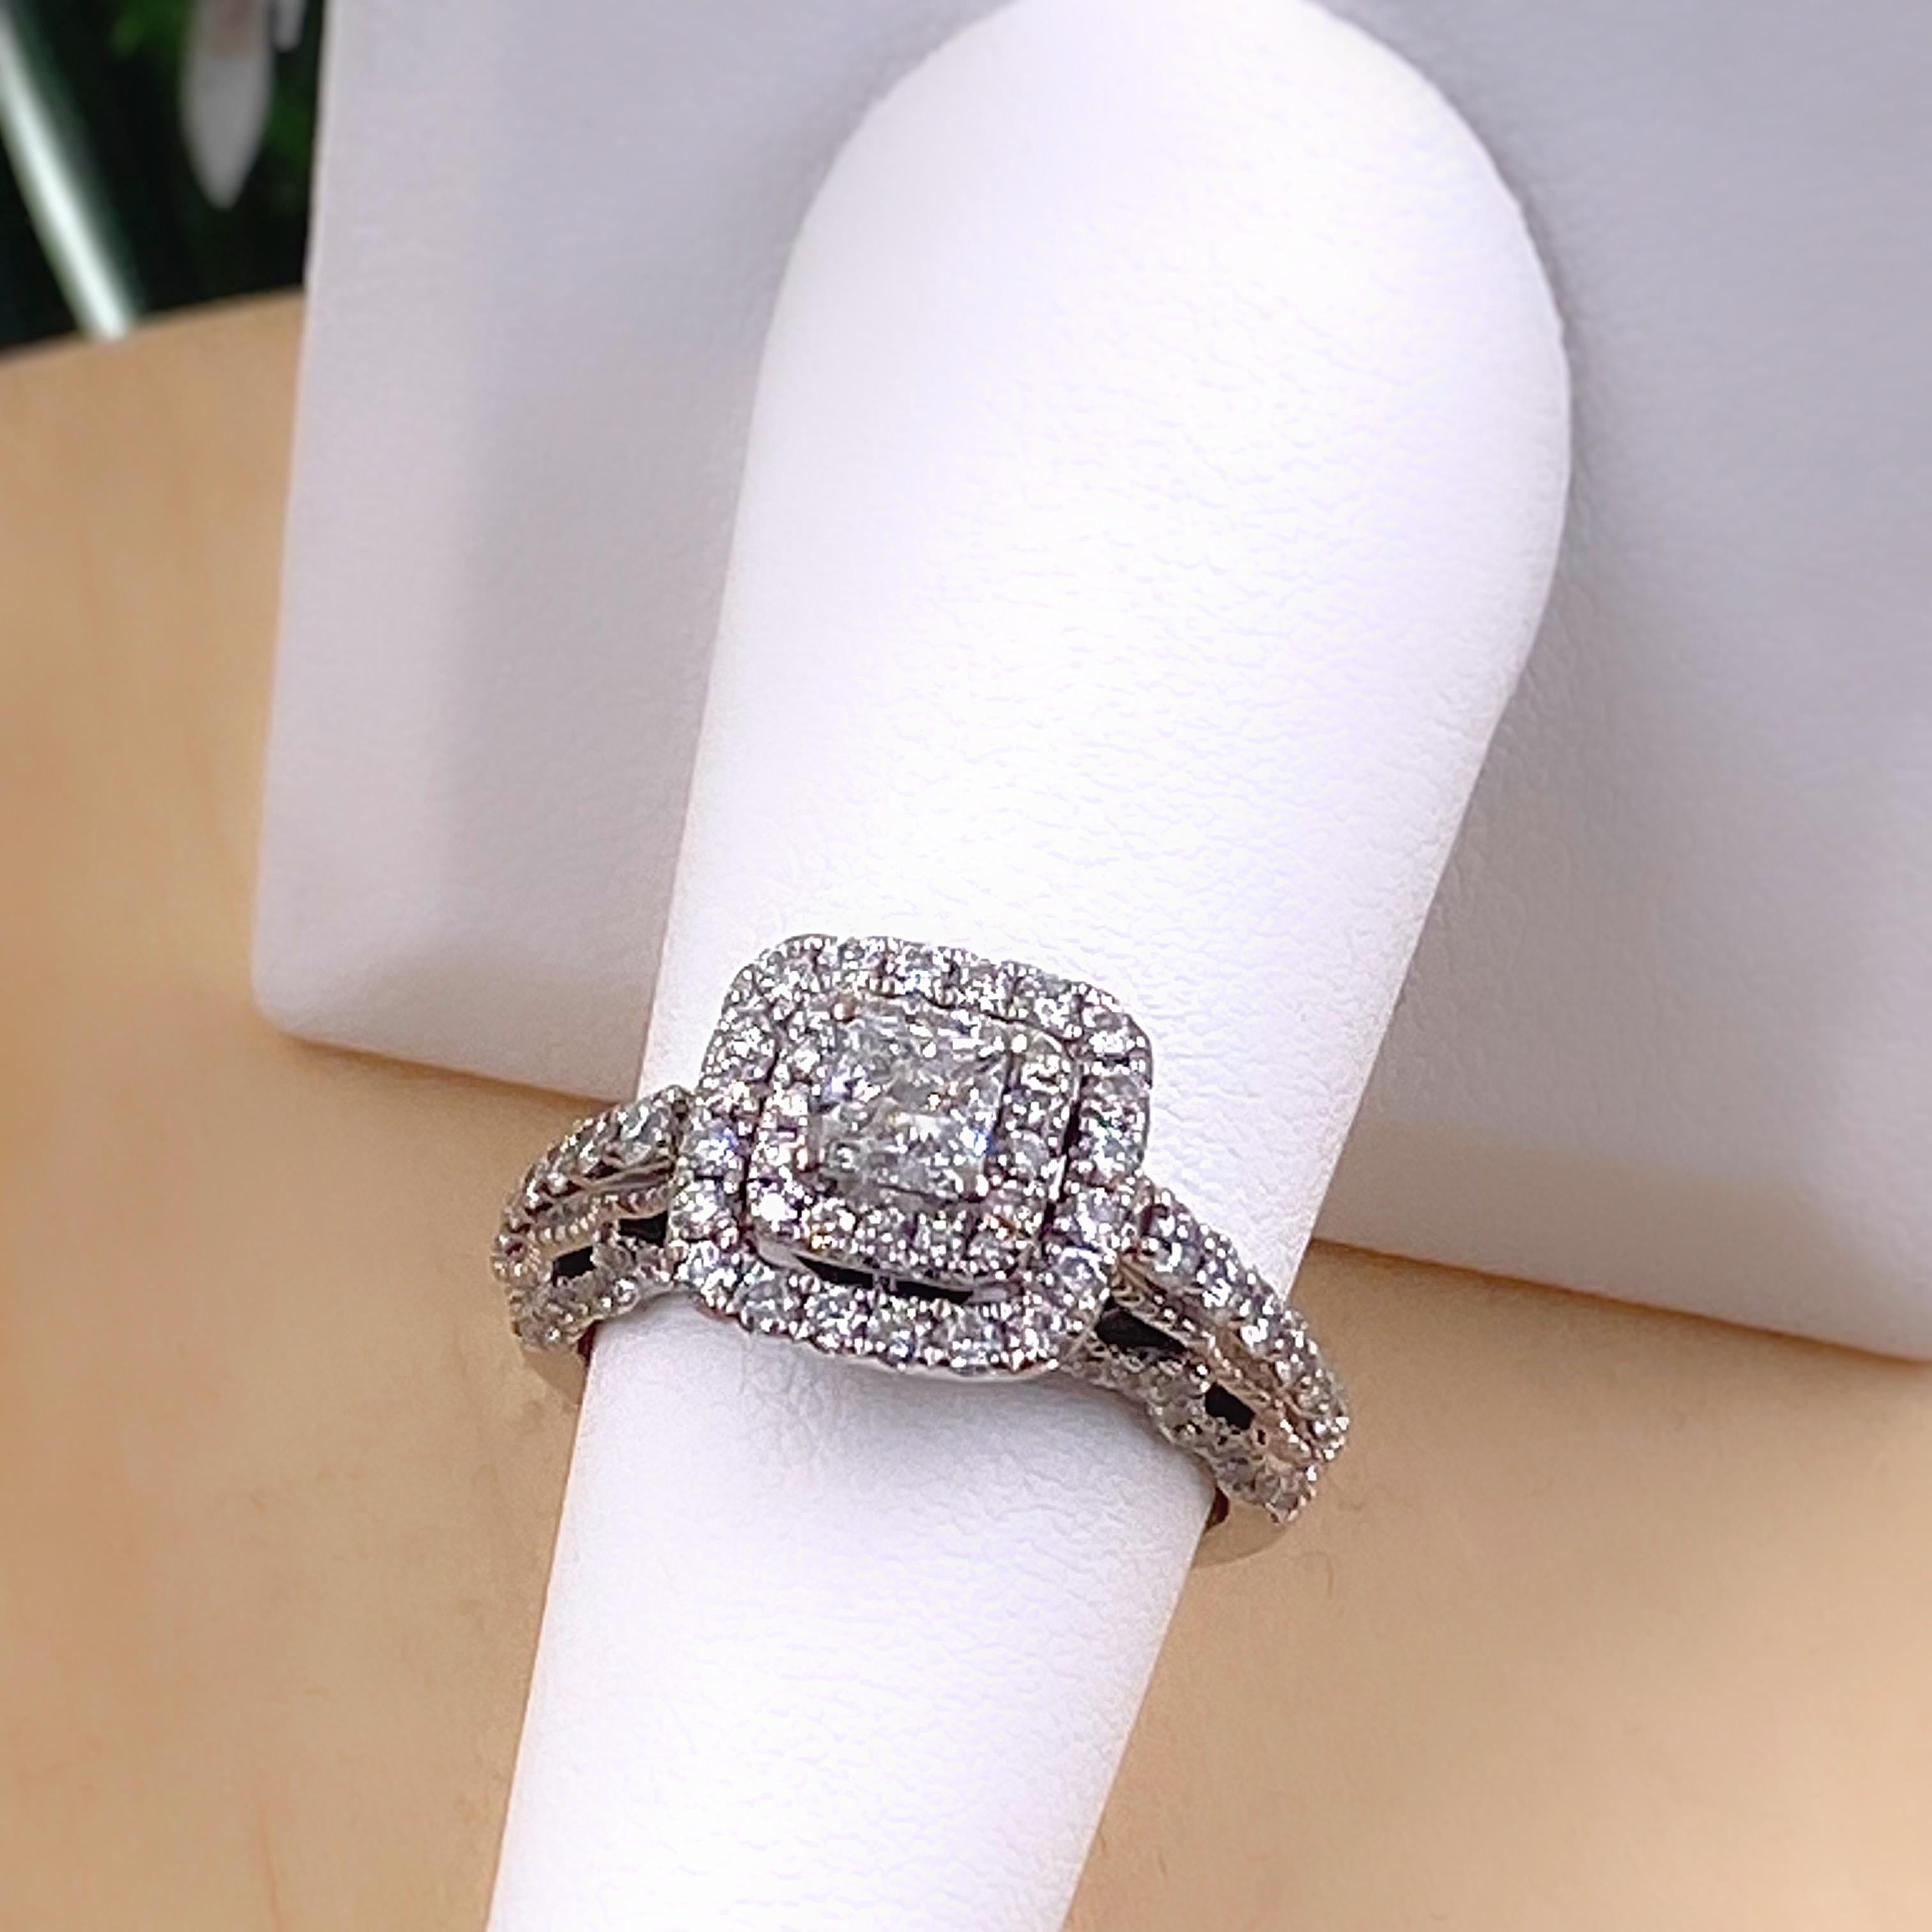 Vera Wang Love Princess Diamond 1 1/3 Tcw Engagment Ring 14kt White Gold In Excellent Condition For Sale In San Diego, CA